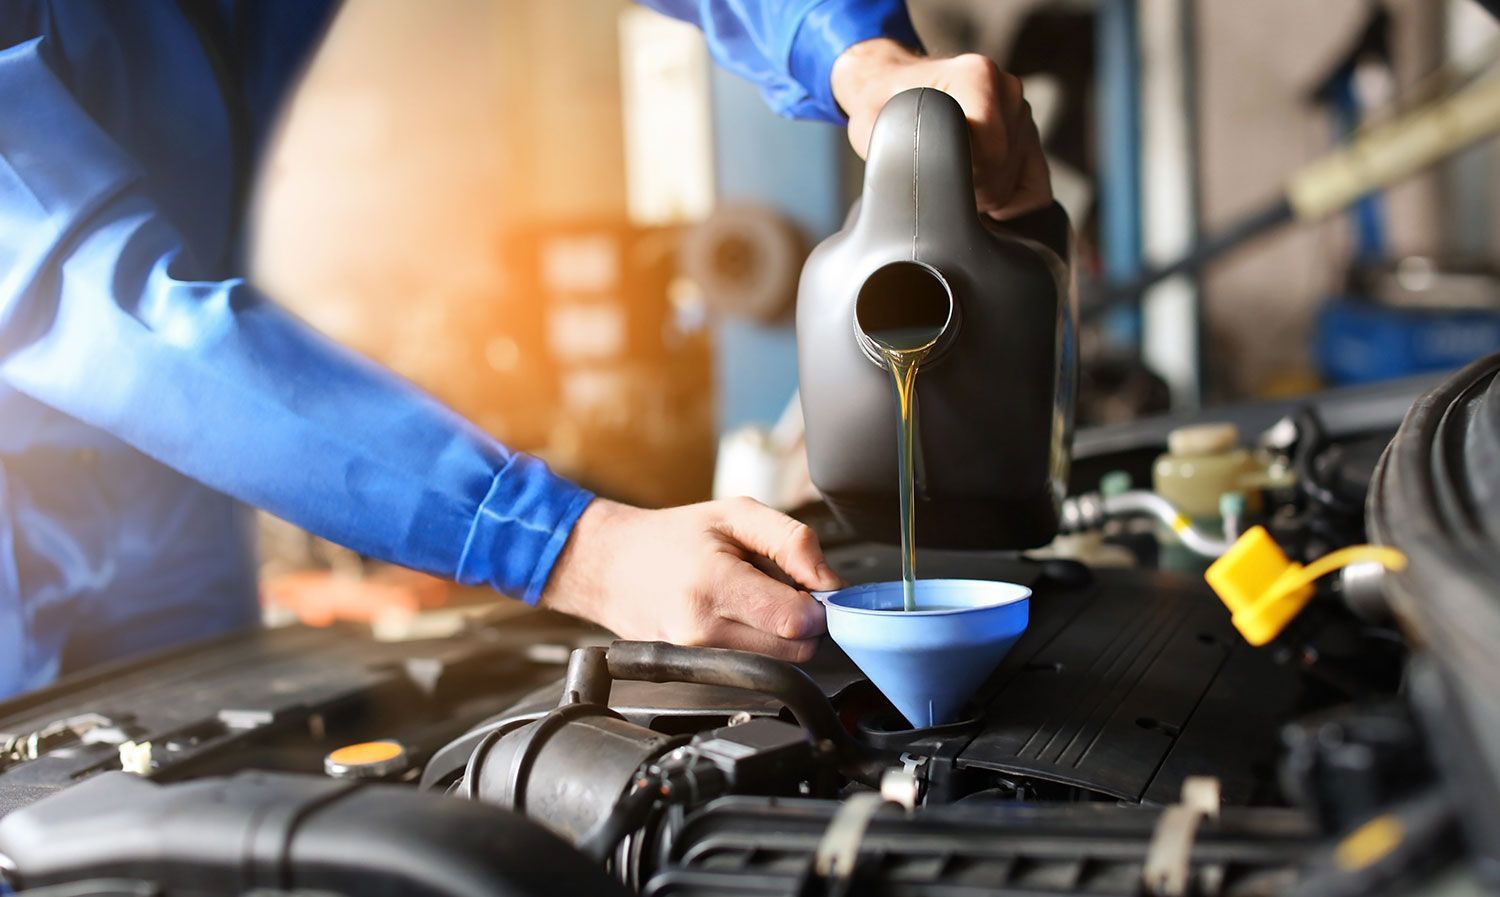 A mechanic is pouring oil into a car engine.